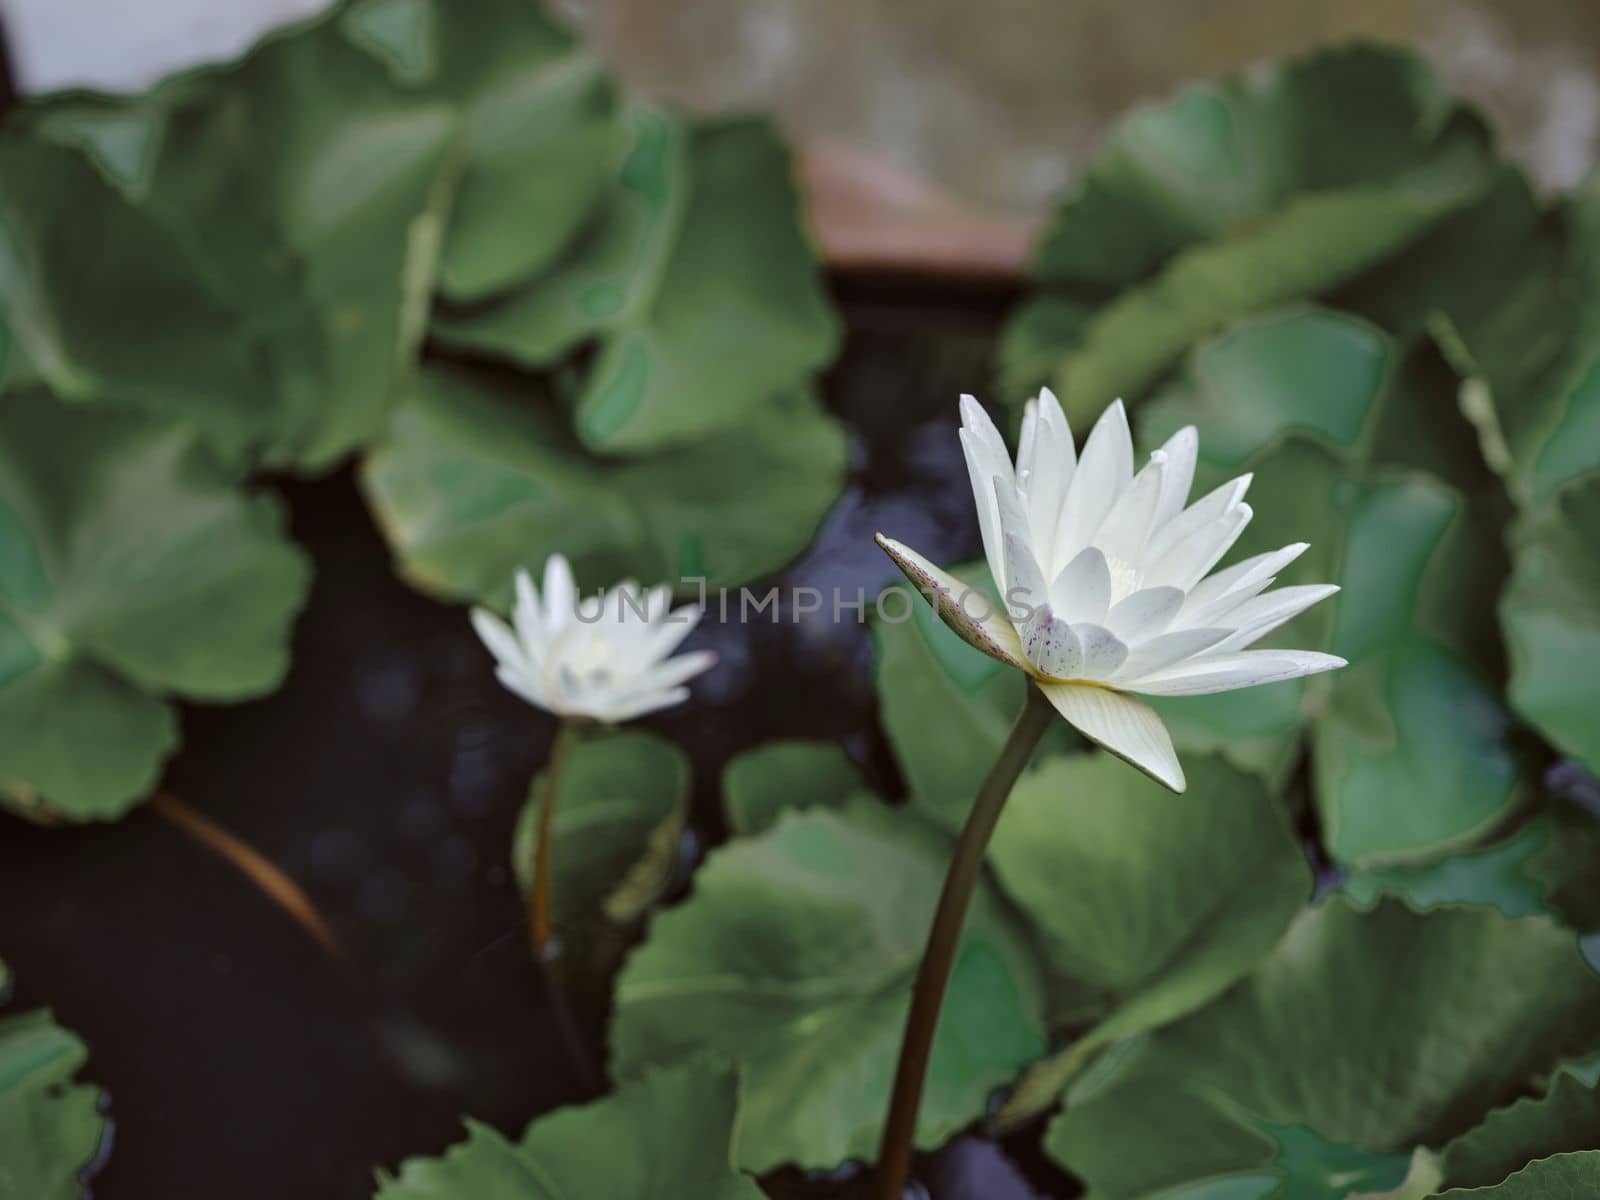 Lotus blooming white flowers in the pond